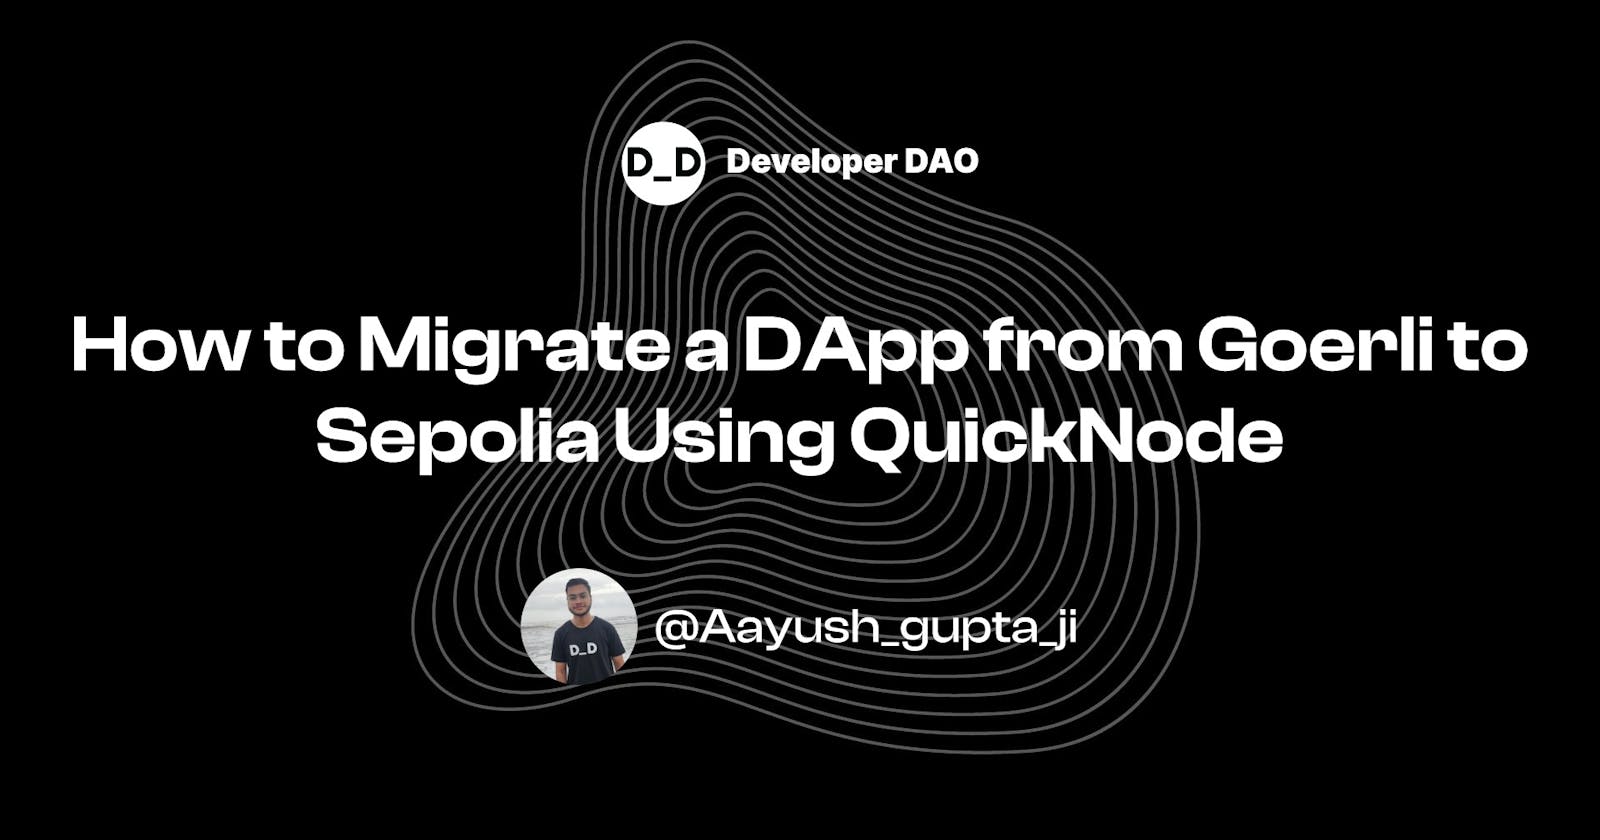 How to Migrate a DApp from Goerli to Sepolia Using QuickNode